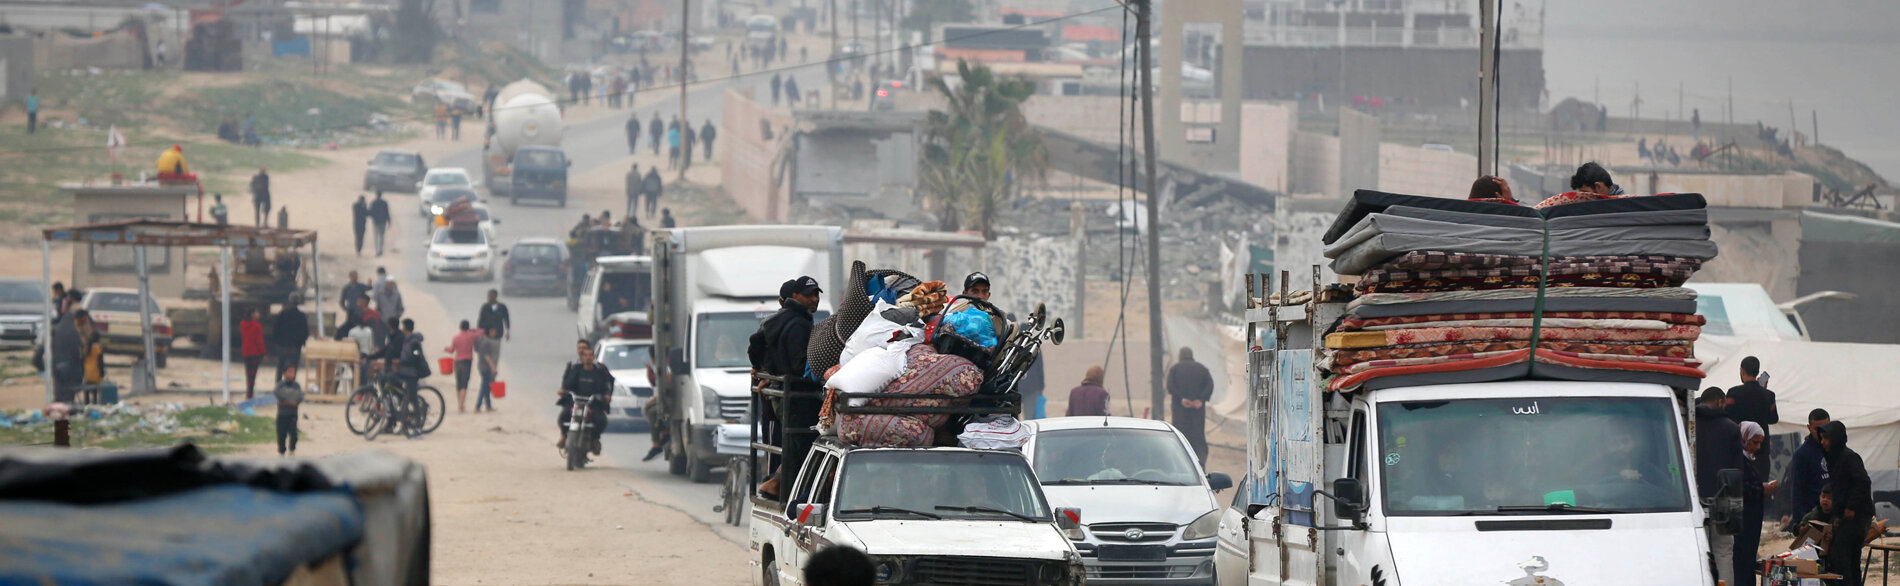 People have been reportedly moving out of Rafah towards Deir al Balah following intensified airstrikes. This is occurring within the context of rising food insecurity, limitations on the entry of aid, the erosion of coping mechanisms, and the prospects of a ground operation in the area. Photo by UNRWA.